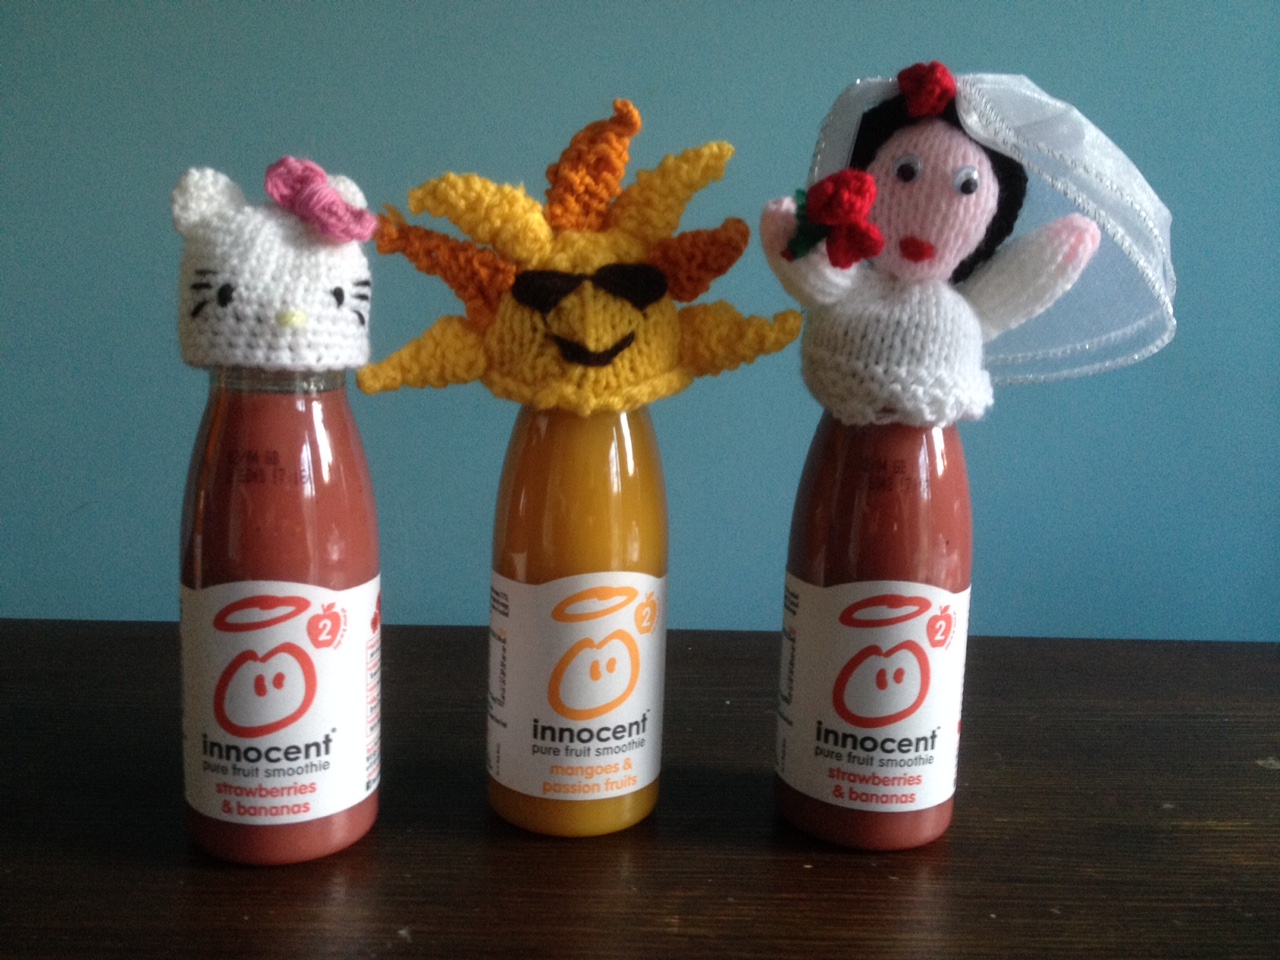 Innocent smoothies with knitted hats